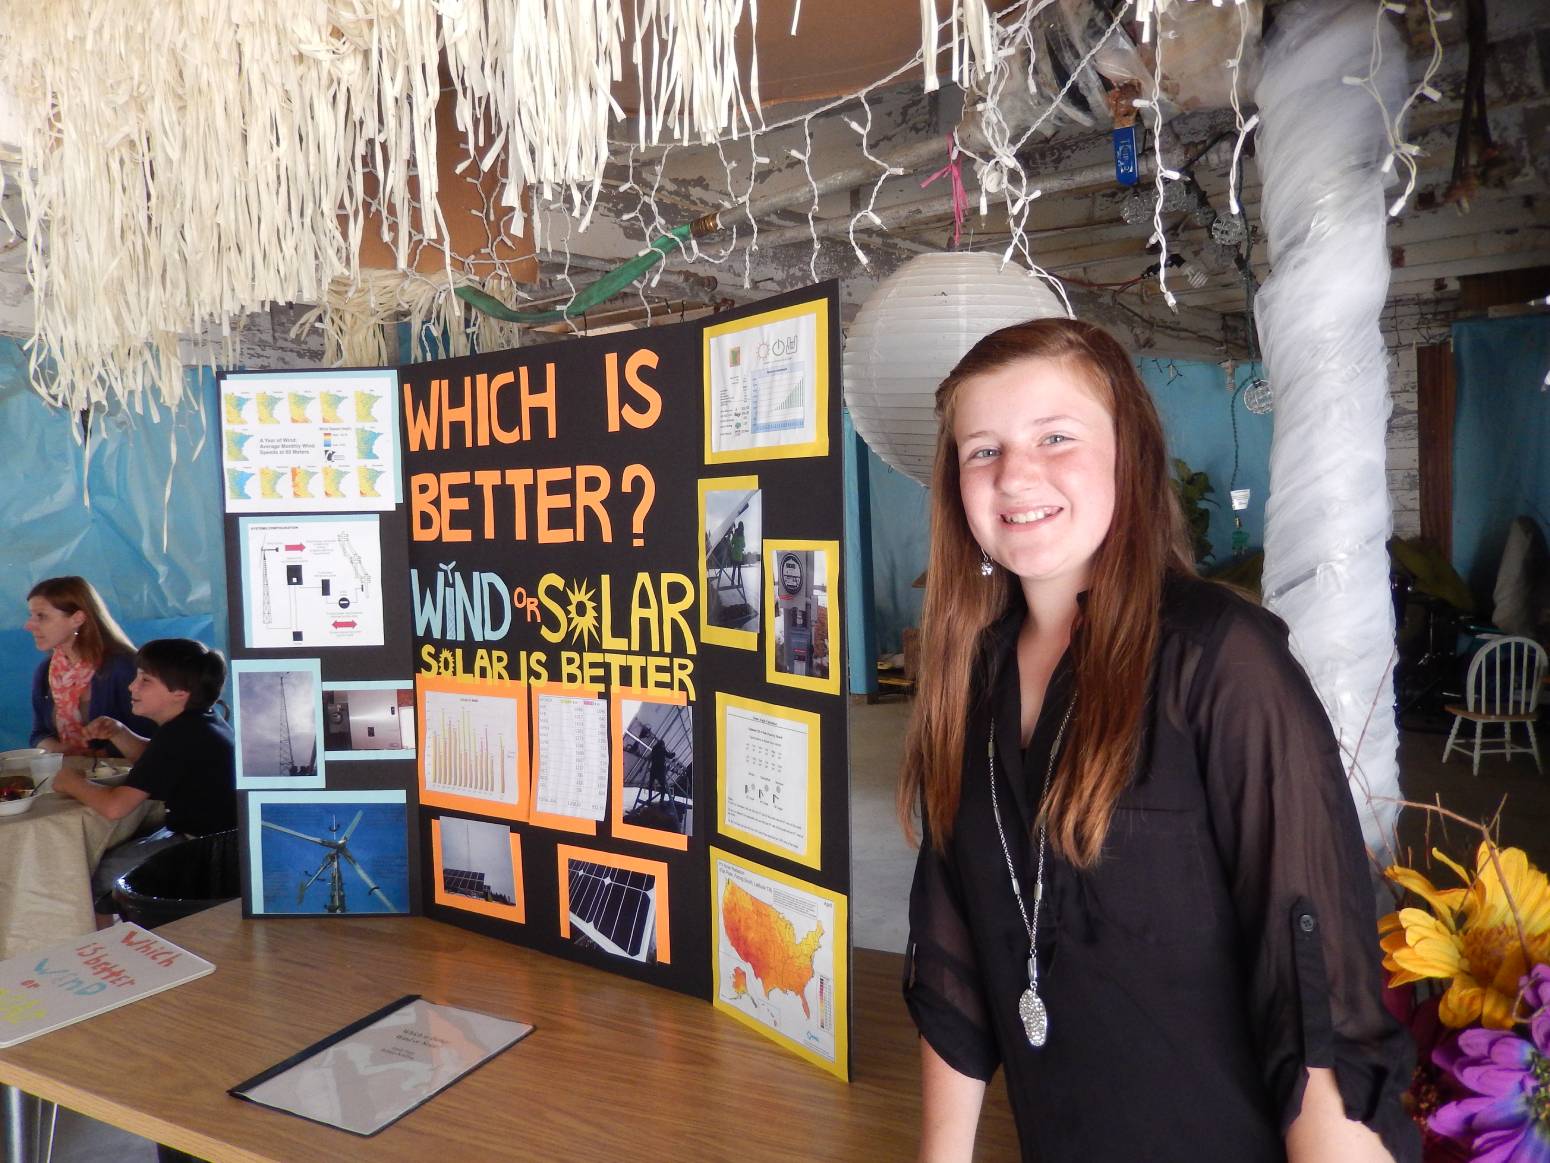 A student standing next to a table presentation about wind and solar.